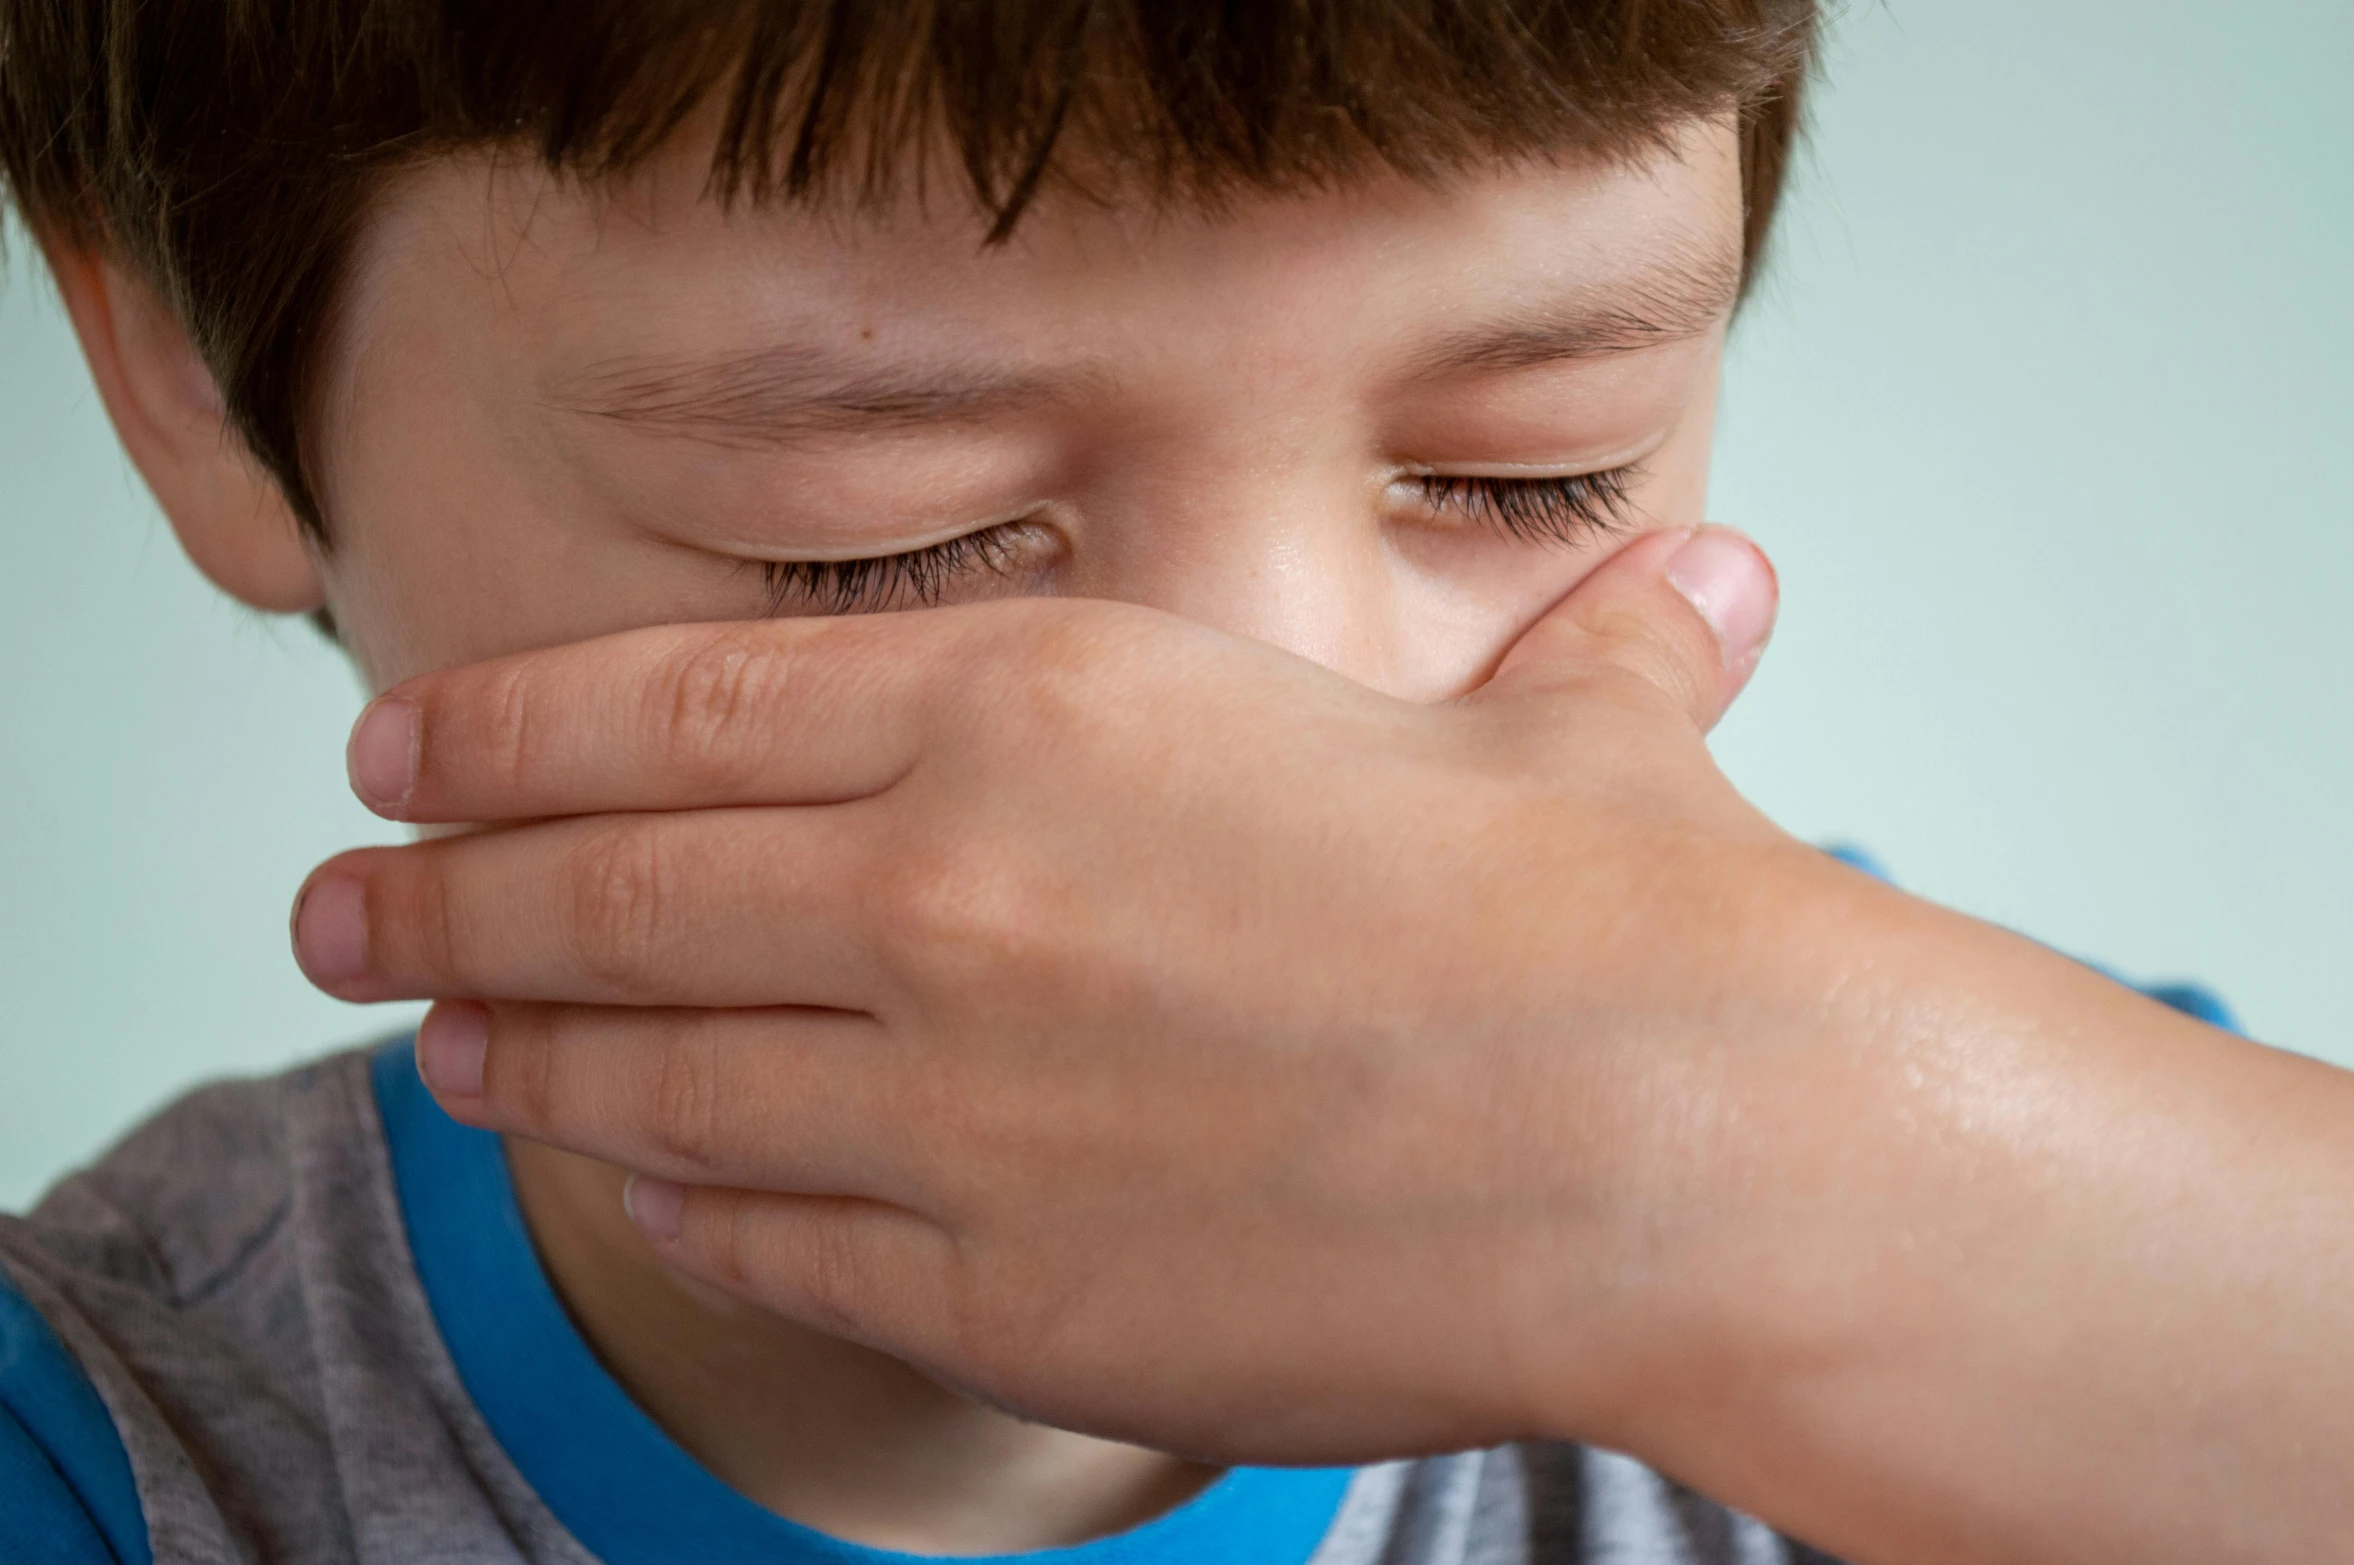 a young boy covers his eyes with his hands, a picture, by Ruth Simpson, shutterstock, visual art, spitting cushions from his mouth, close up shot from the side, nasal strip, hugging his knees